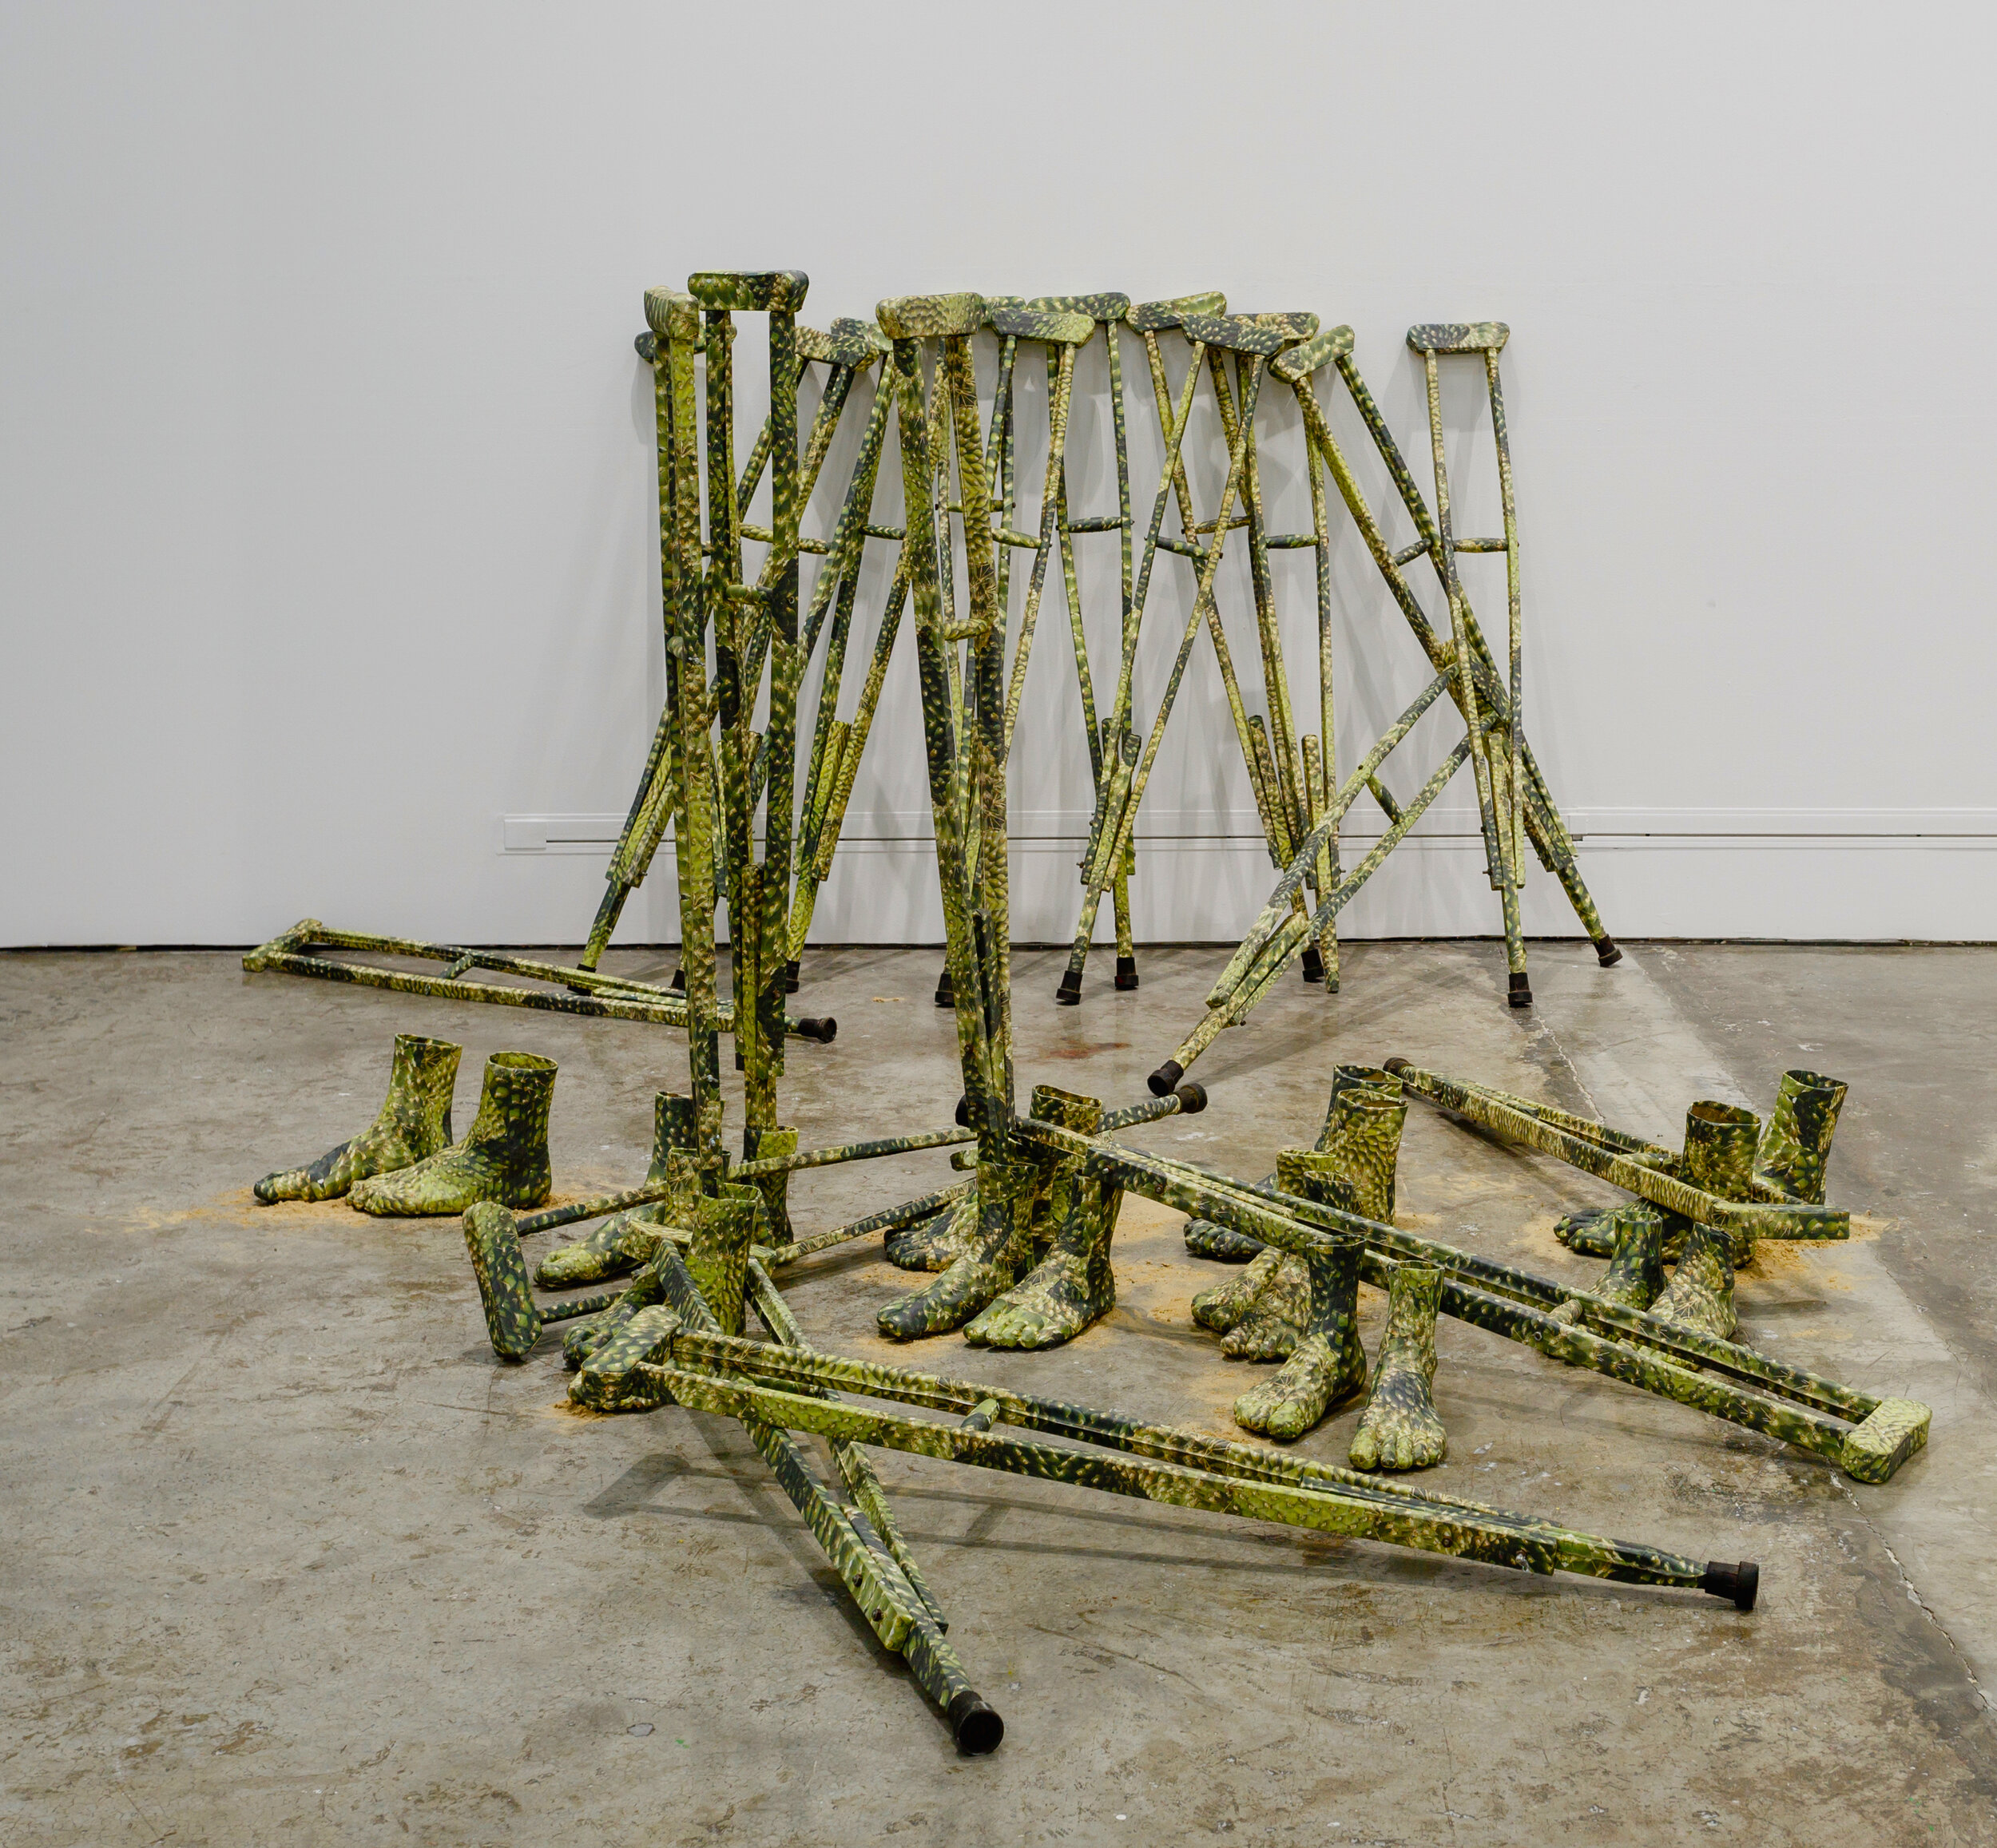  Cactus Feet, Cactus Crutches, 2016, cut-outs of printed canvas on wooden crutches, and on synthetic resin feet, dimensions variable 